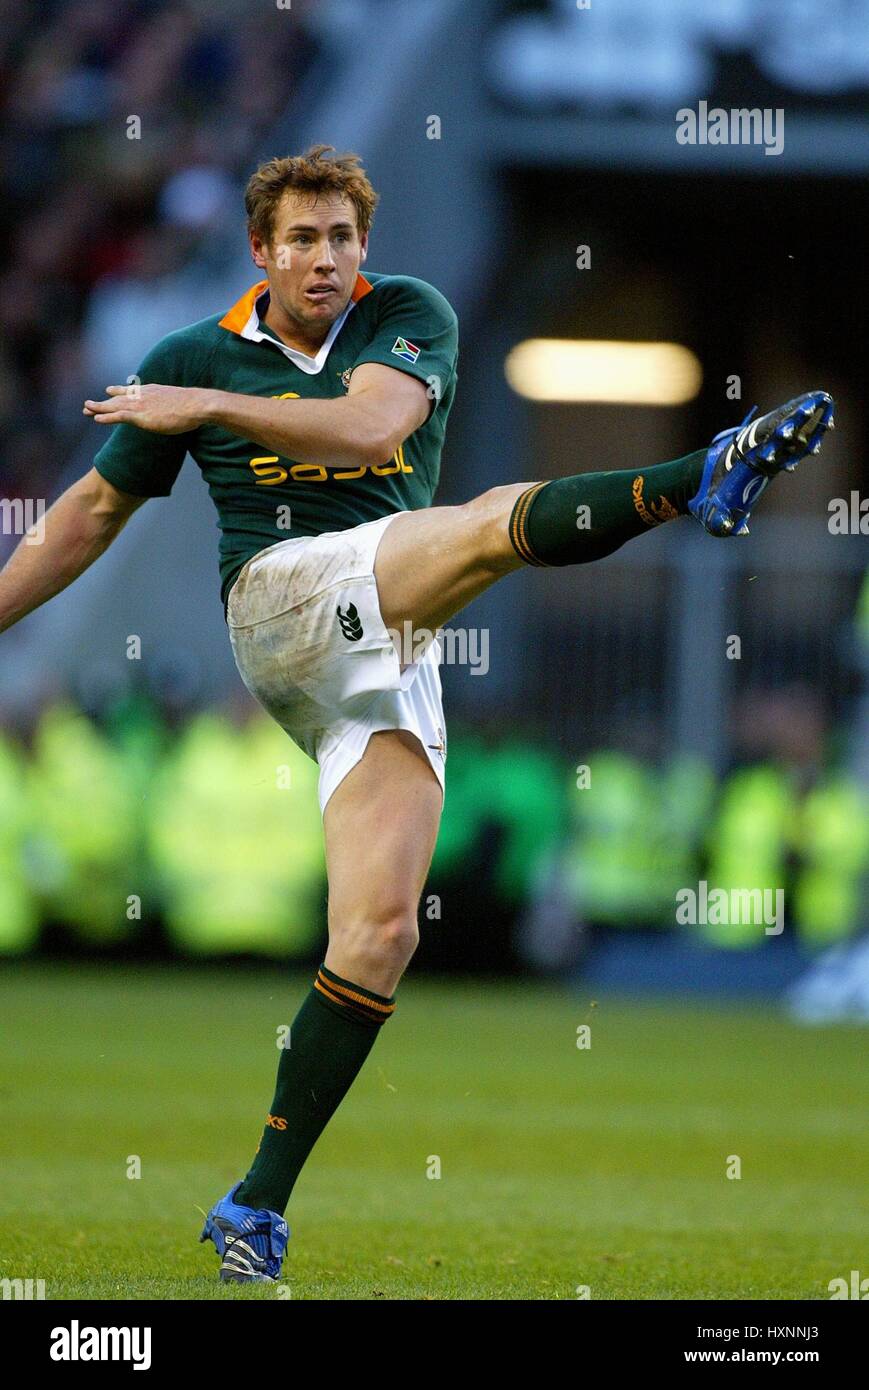 Former South Africa fly-half Butch James agrees deal to return to